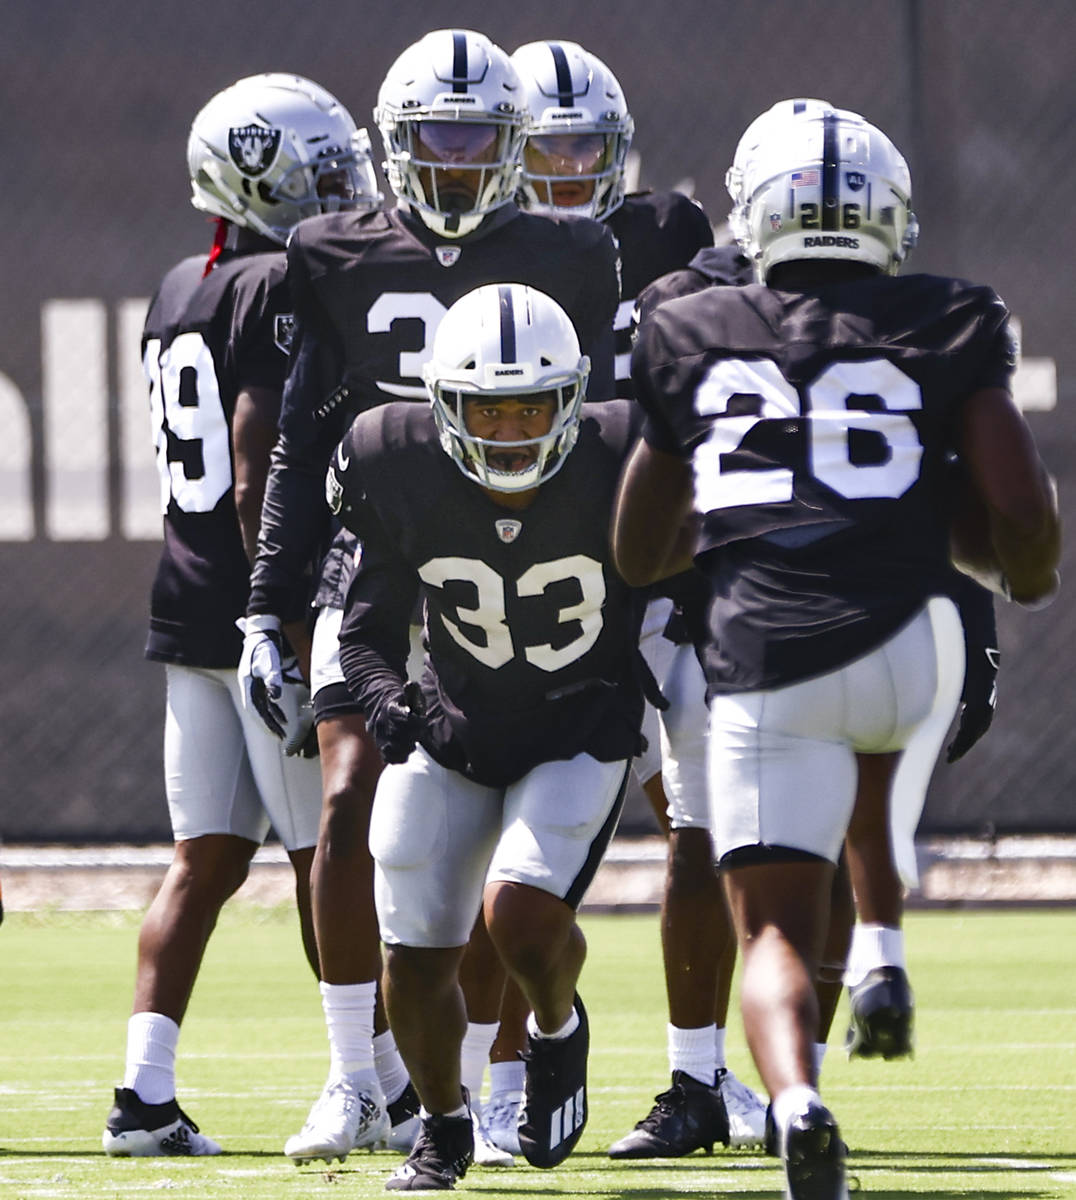 Raiders safety Roderic Teamer (33) participates in drills during training camp at Raiders Headq ...